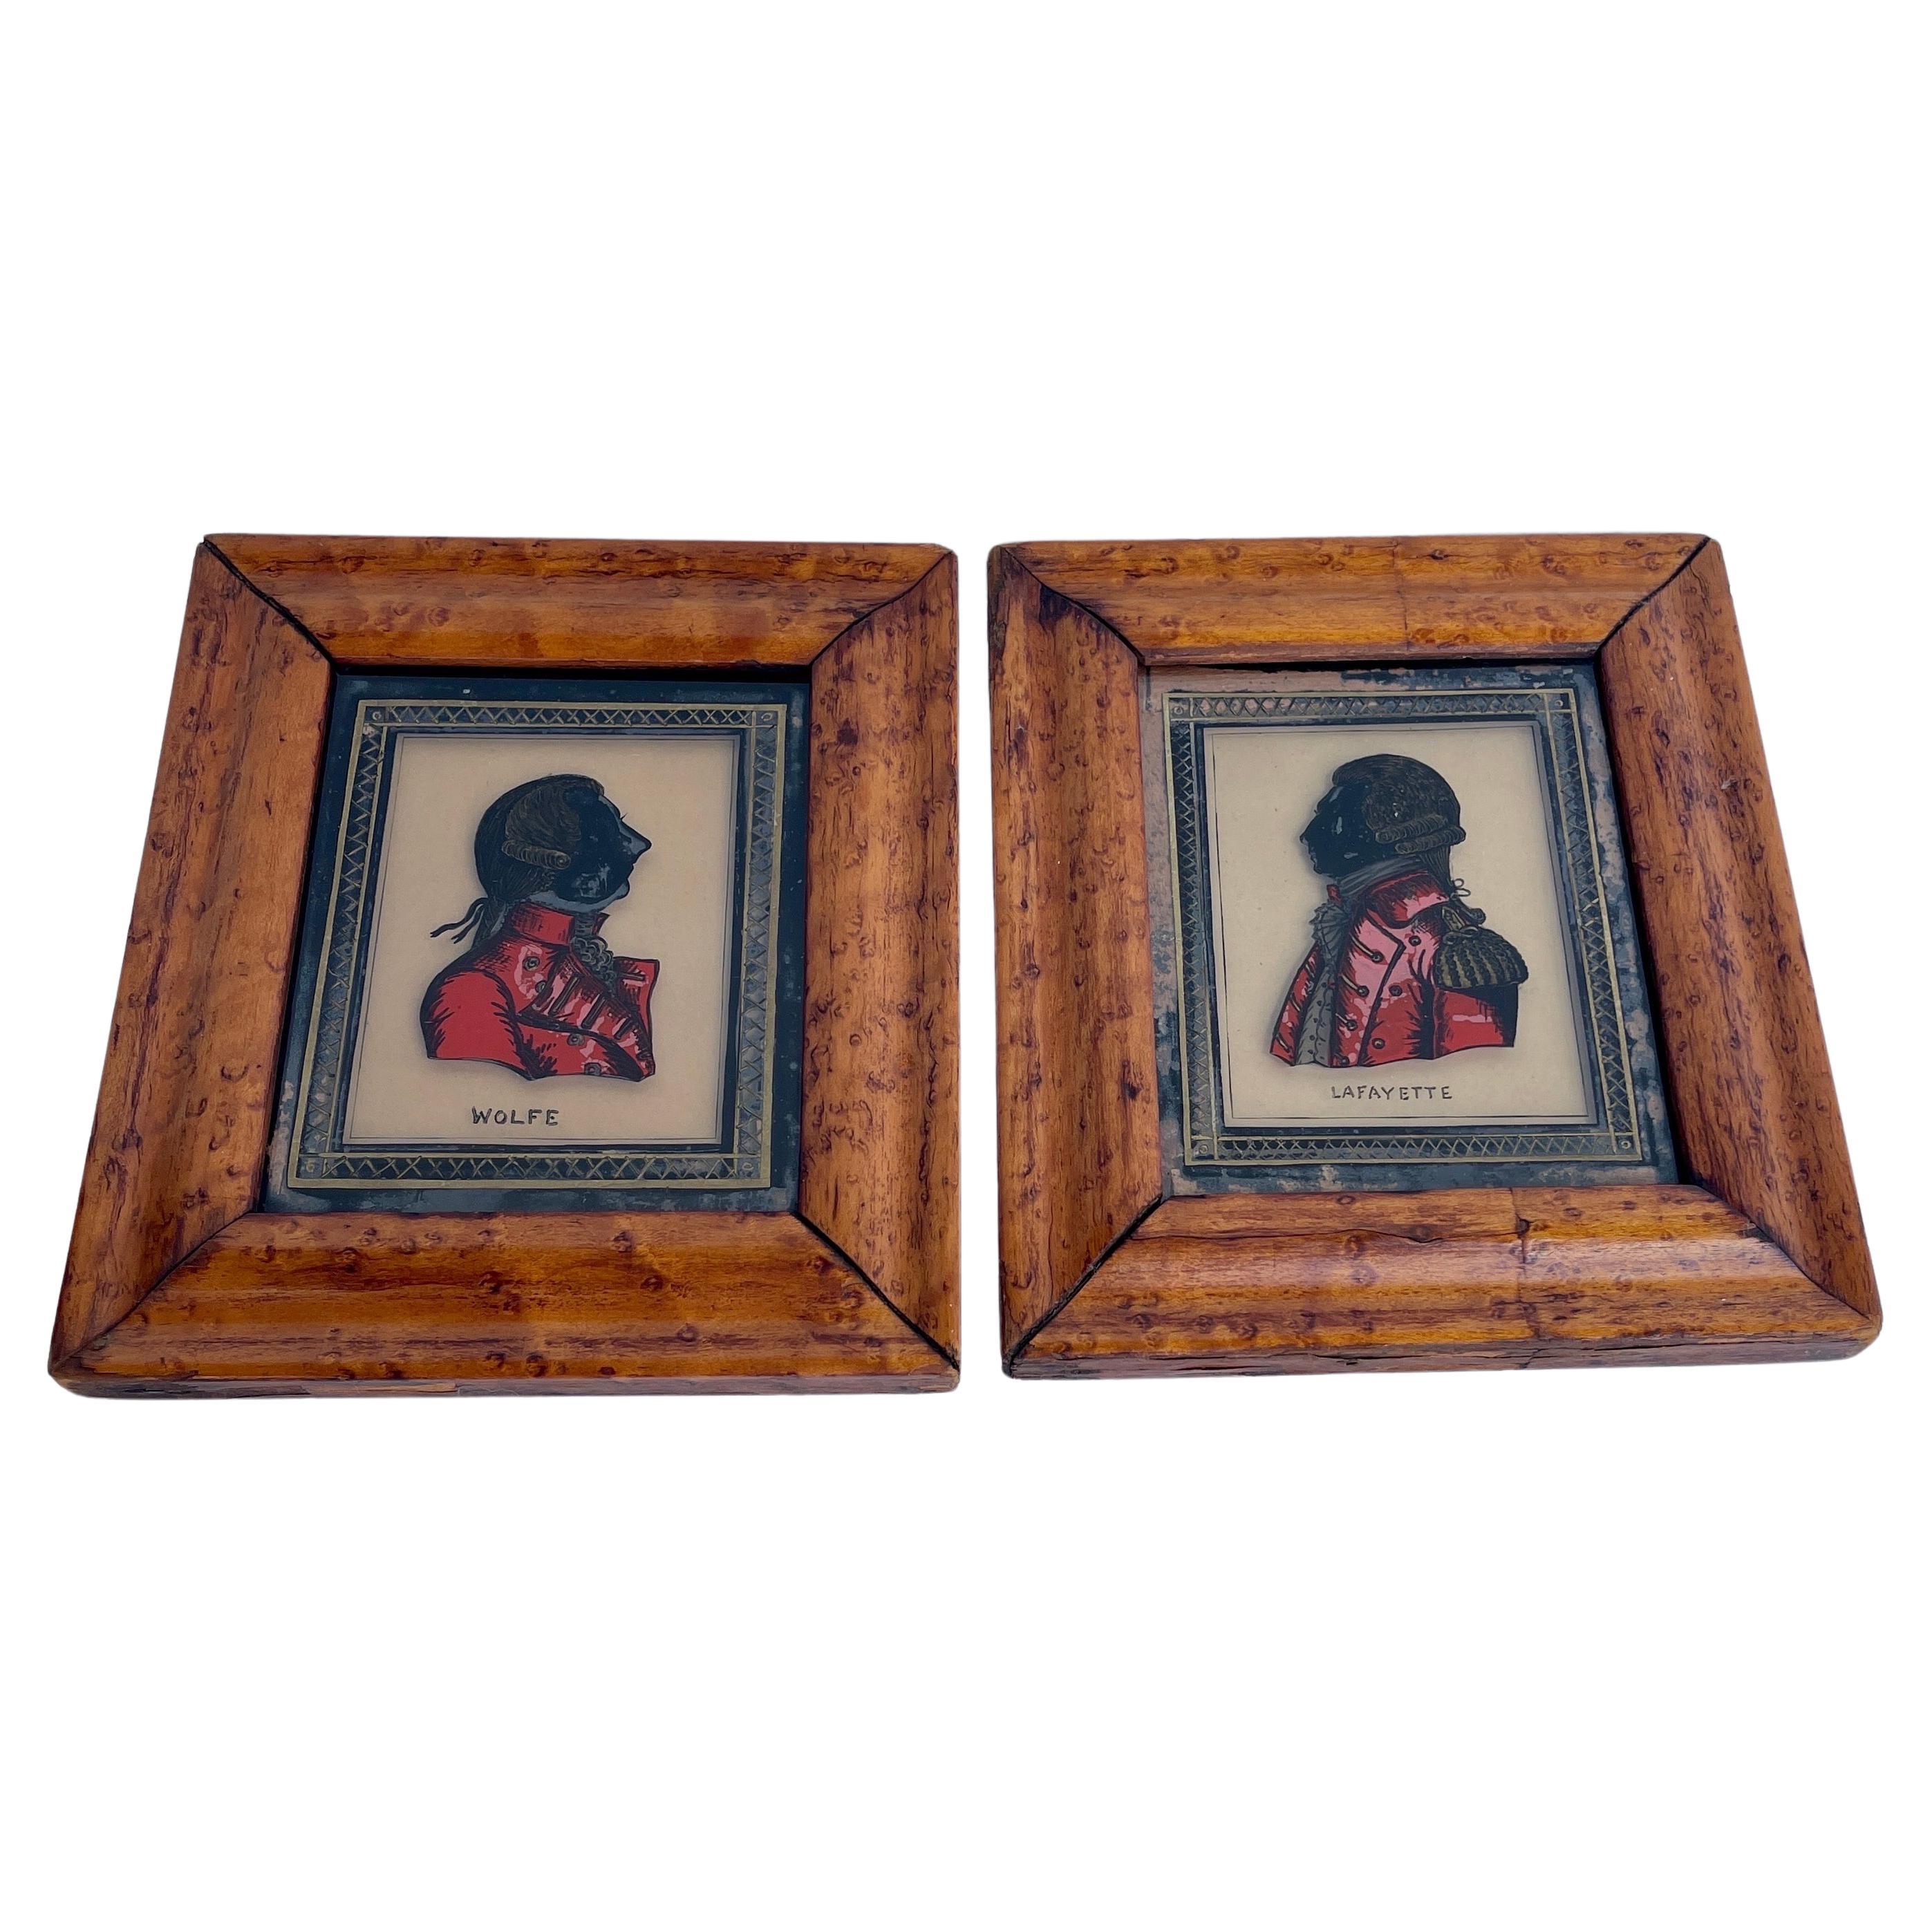 Pair of Small Reverse Painted Glass Portraits of Nobility in Burl Wood Frames In Good Condition For Sale In Haddonfield, NJ